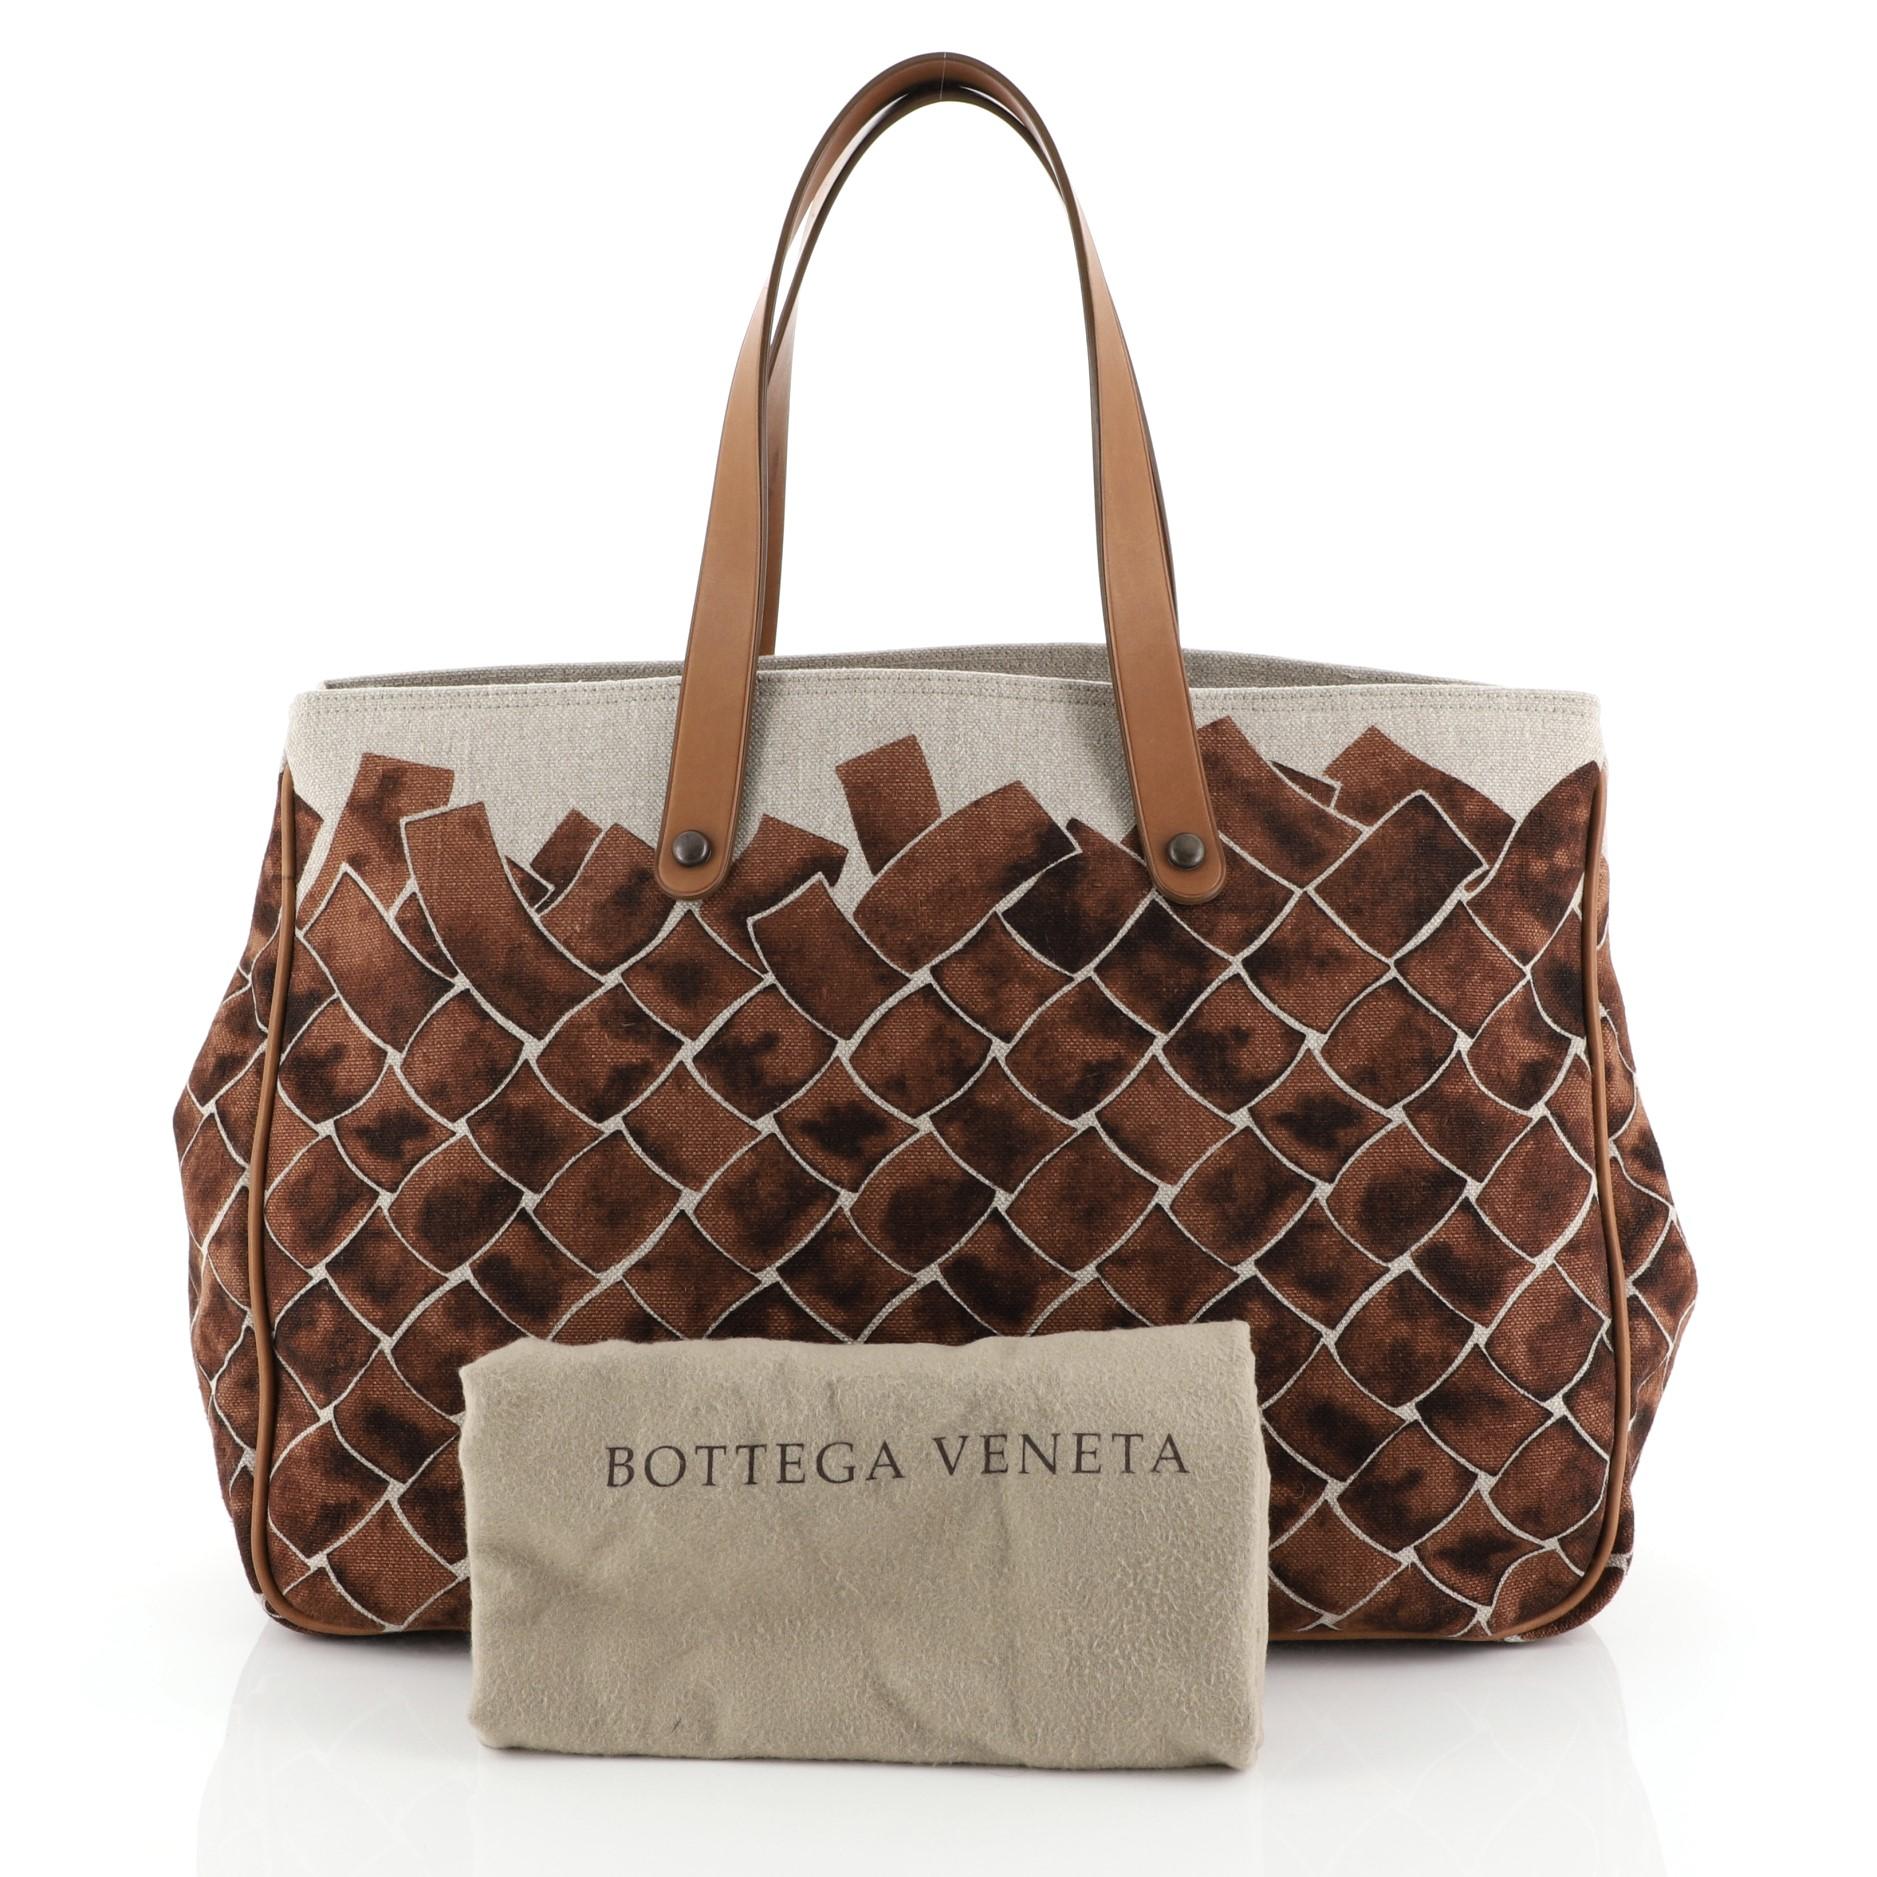 This Bottega Veneta Open Tote Printed Canvas Large, crafted from brown printed canvas, features flat leather straps, leather trim and bronze-tone hardware. It opens to a gray fabric interior.

Condition: Very good. Minor wear on base corners, scuffs